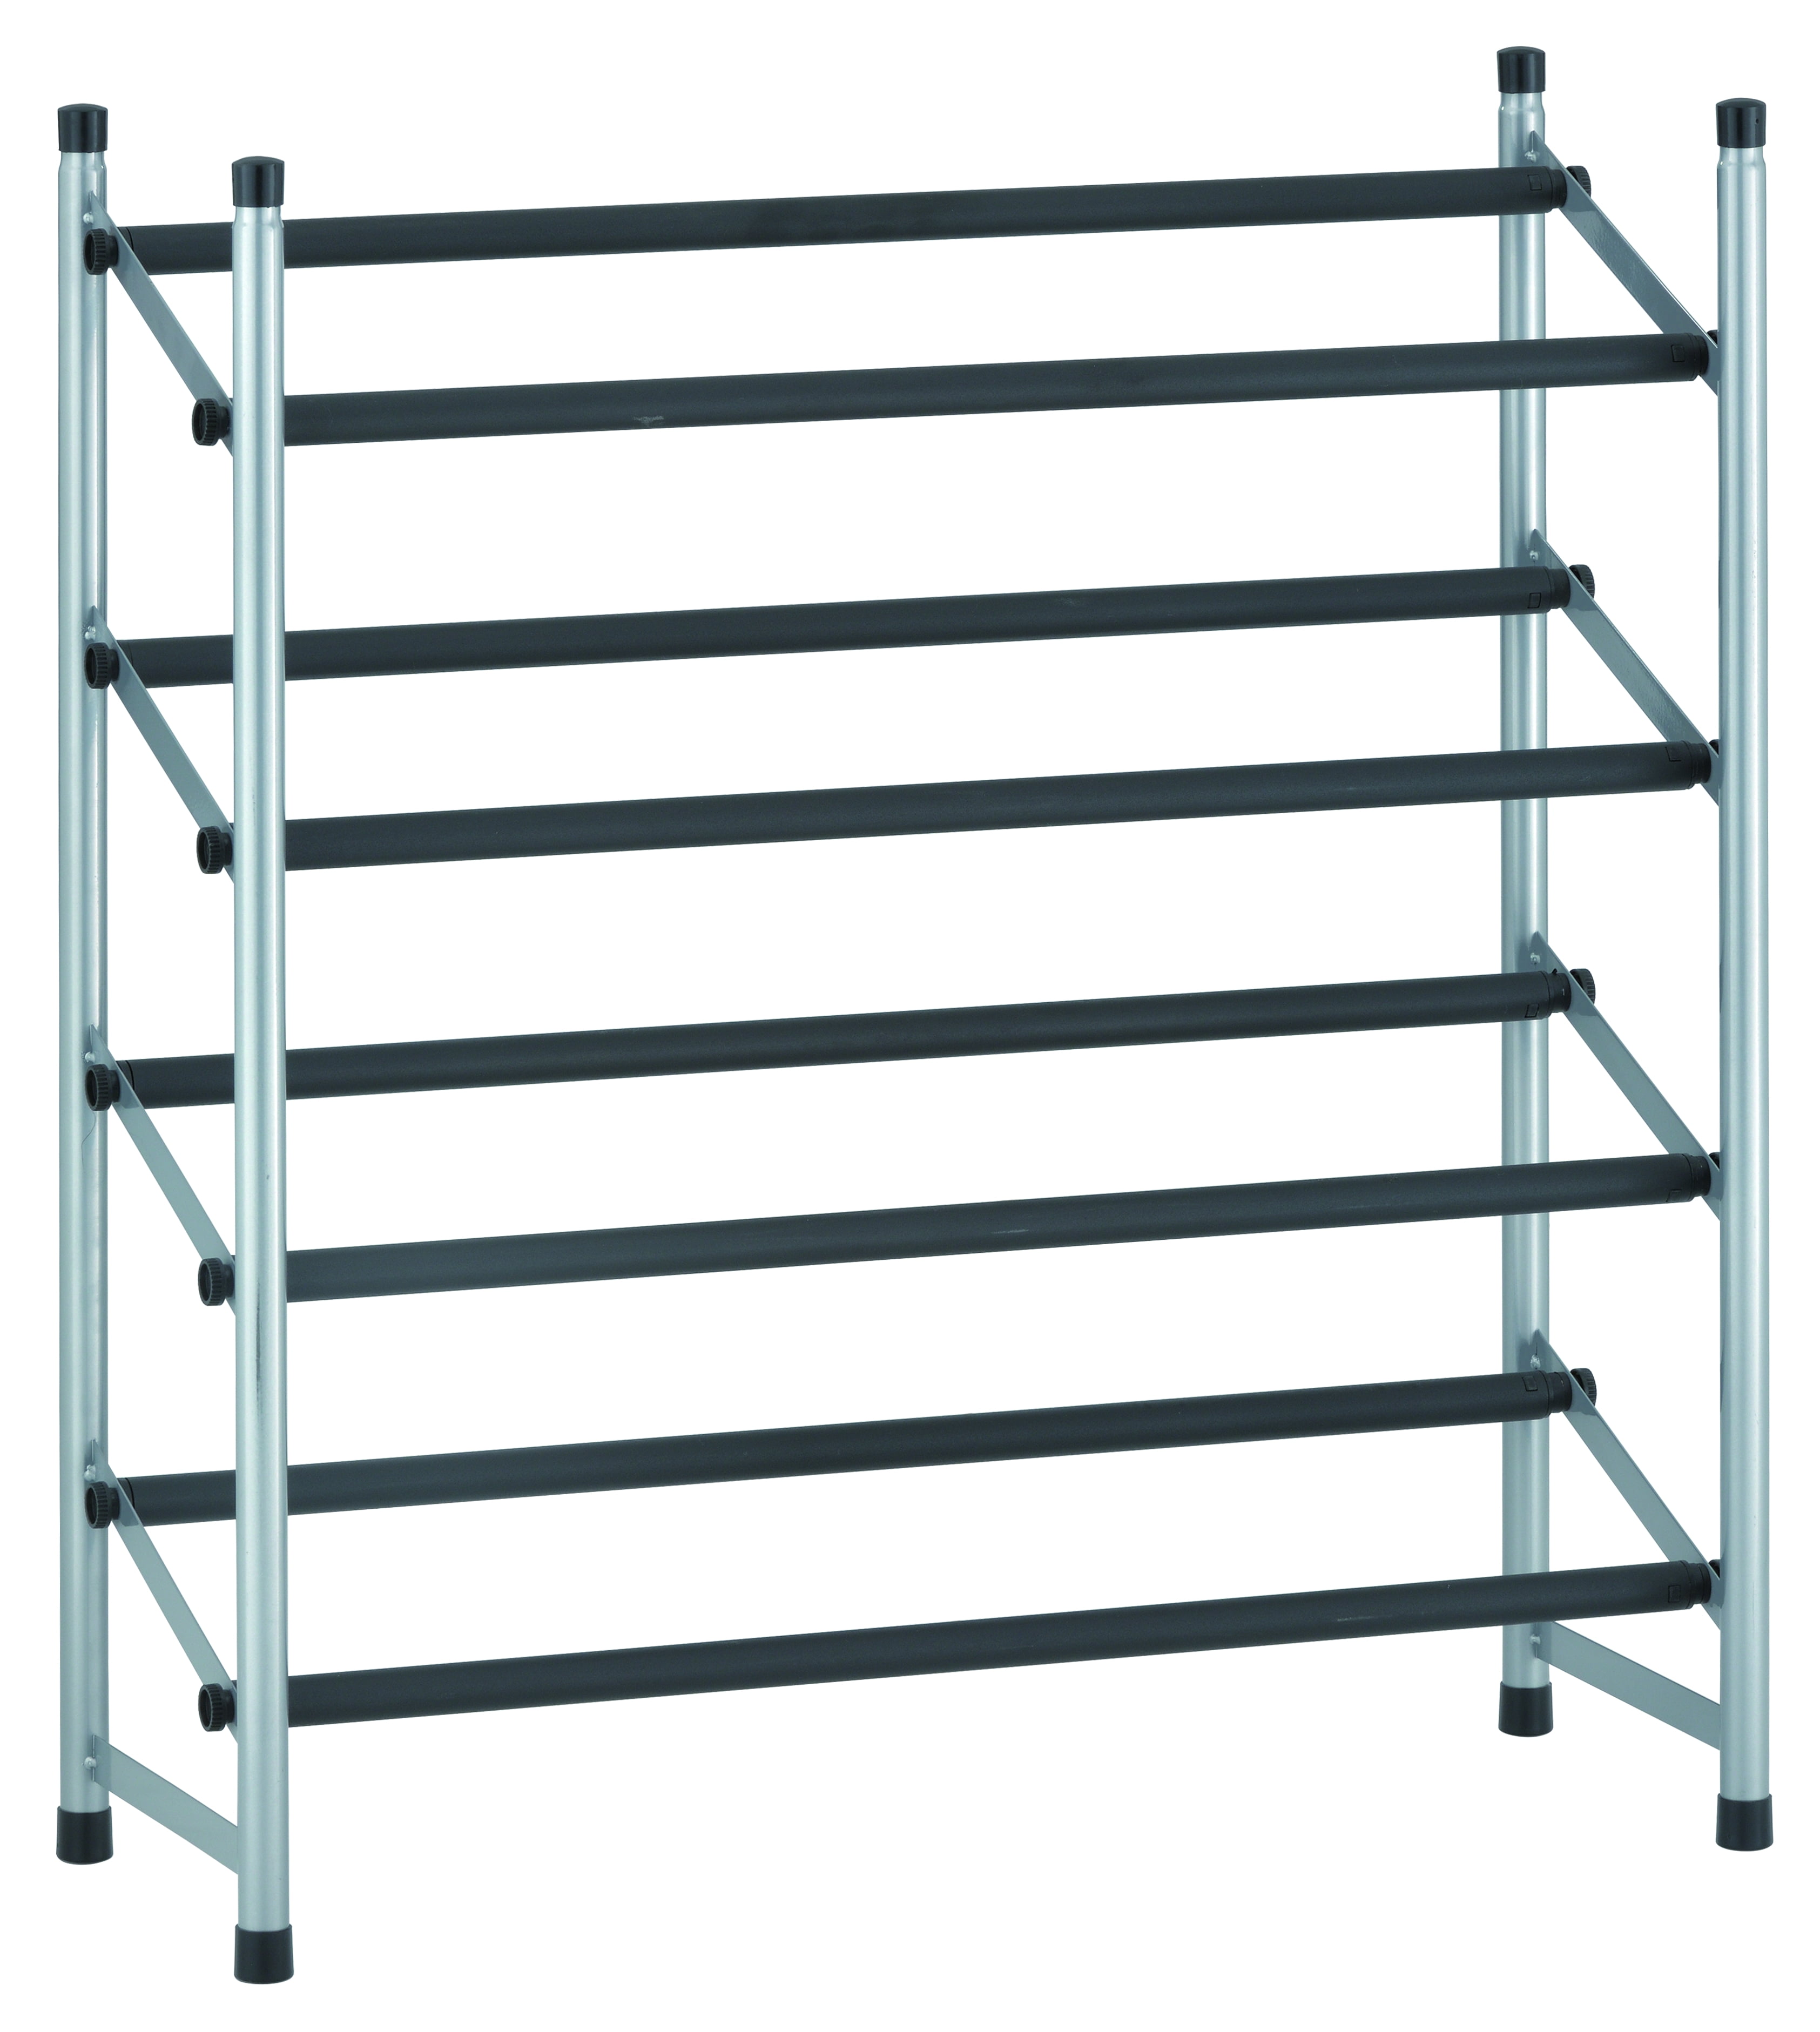 Mainstays 4-Tier Shoe Rack Black Rod, Power Coating Silver, up to 20 Pairs